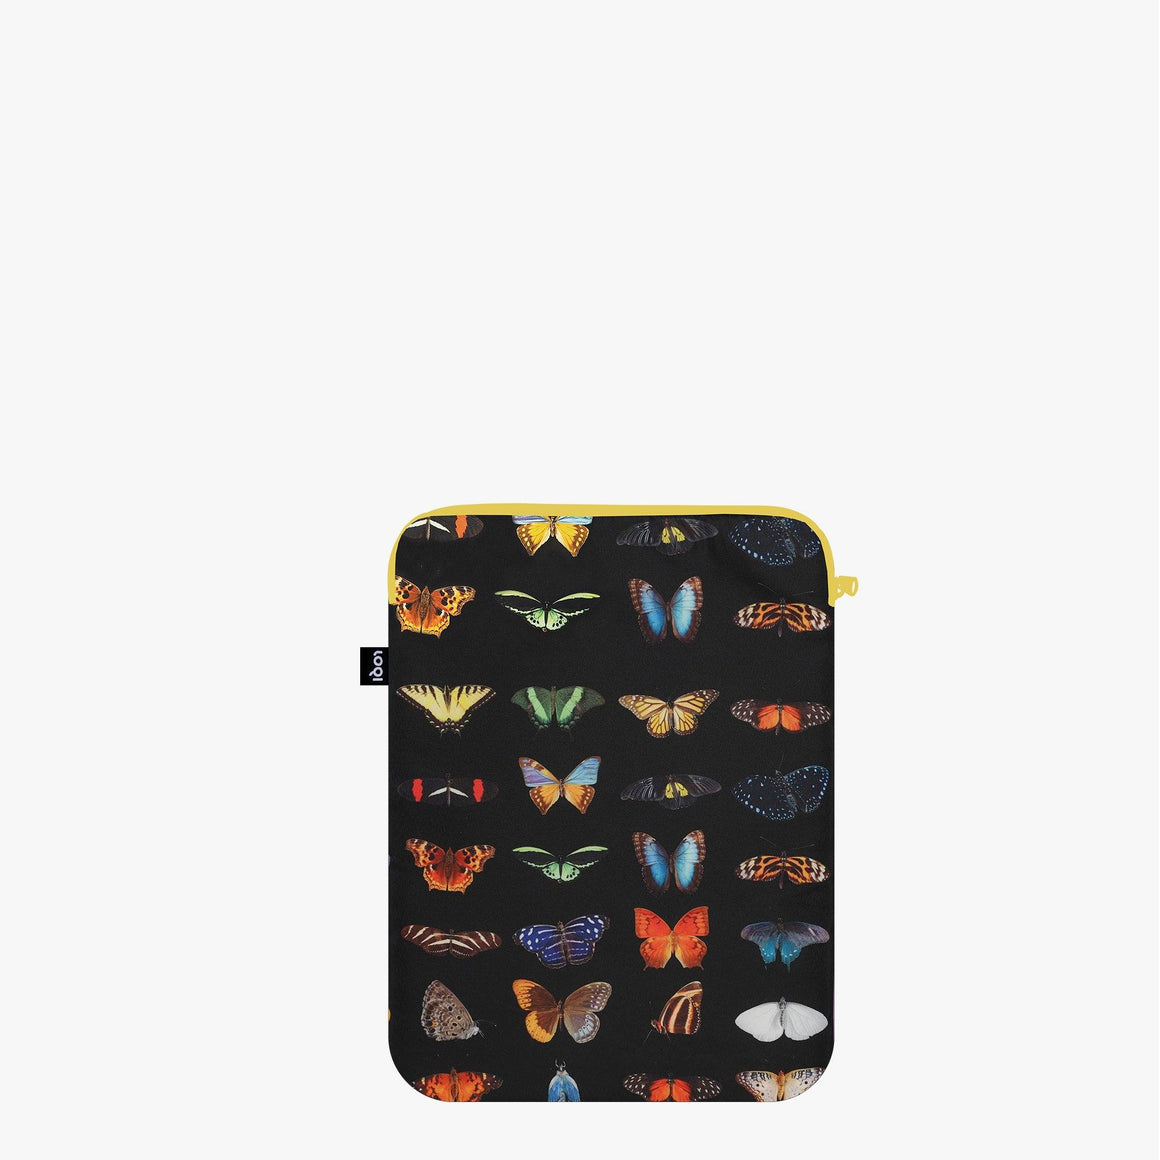 Laptop Sleeve - NATIONAL GEOGRAPHIC Butterflies